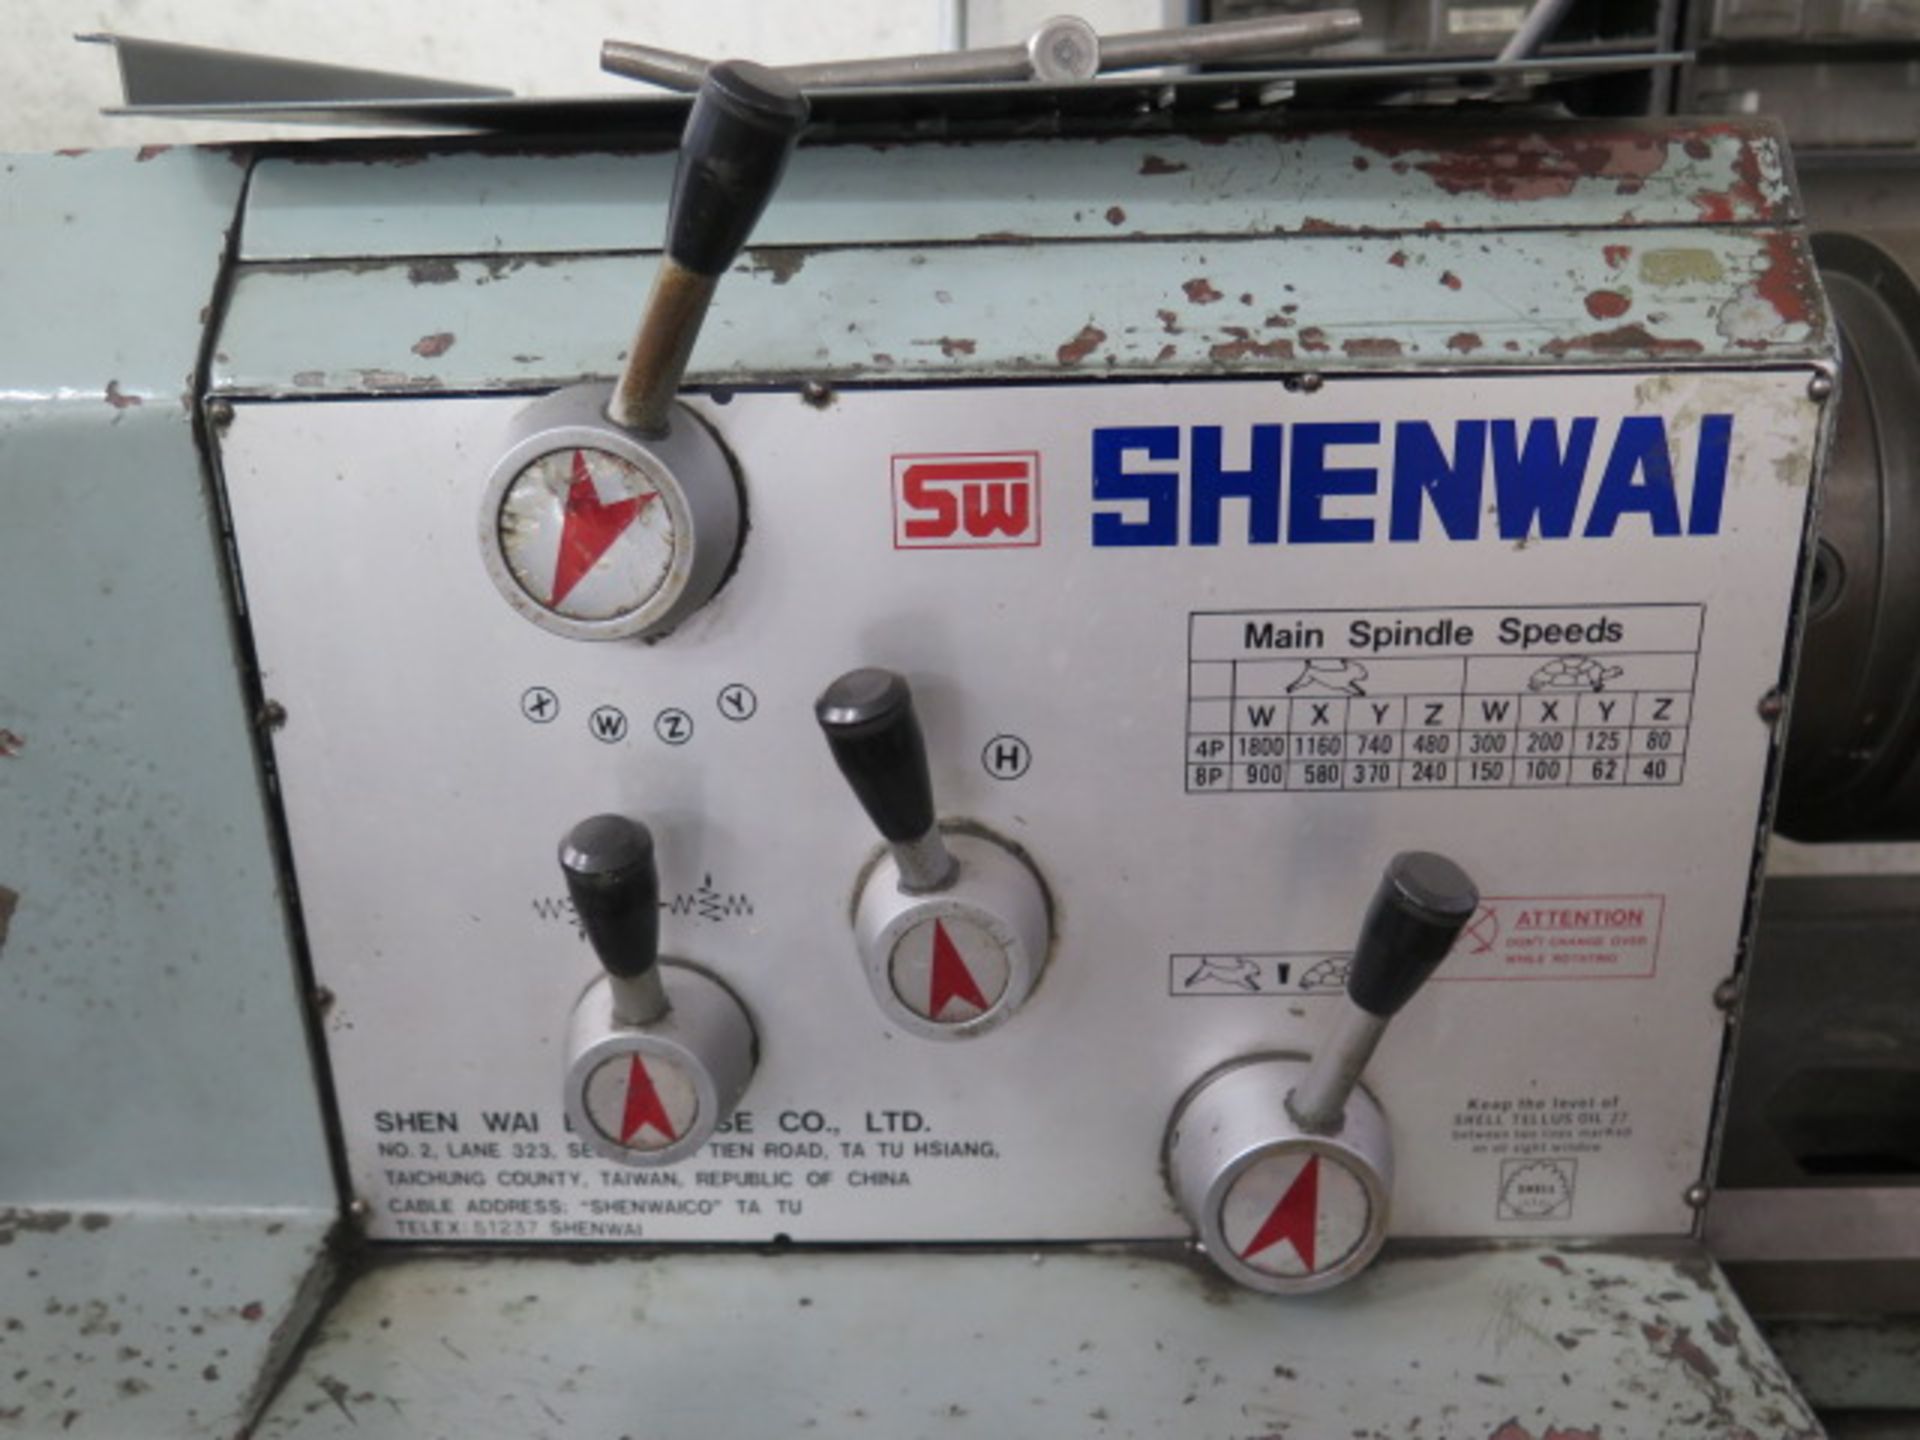 SW Shenwai “Chieftain” 15” x 40” Geared Head Gap Lathe s/n 10449 w/ 40-1800 RPM, Inch/mm, SOLD AS IS - Image 4 of 12